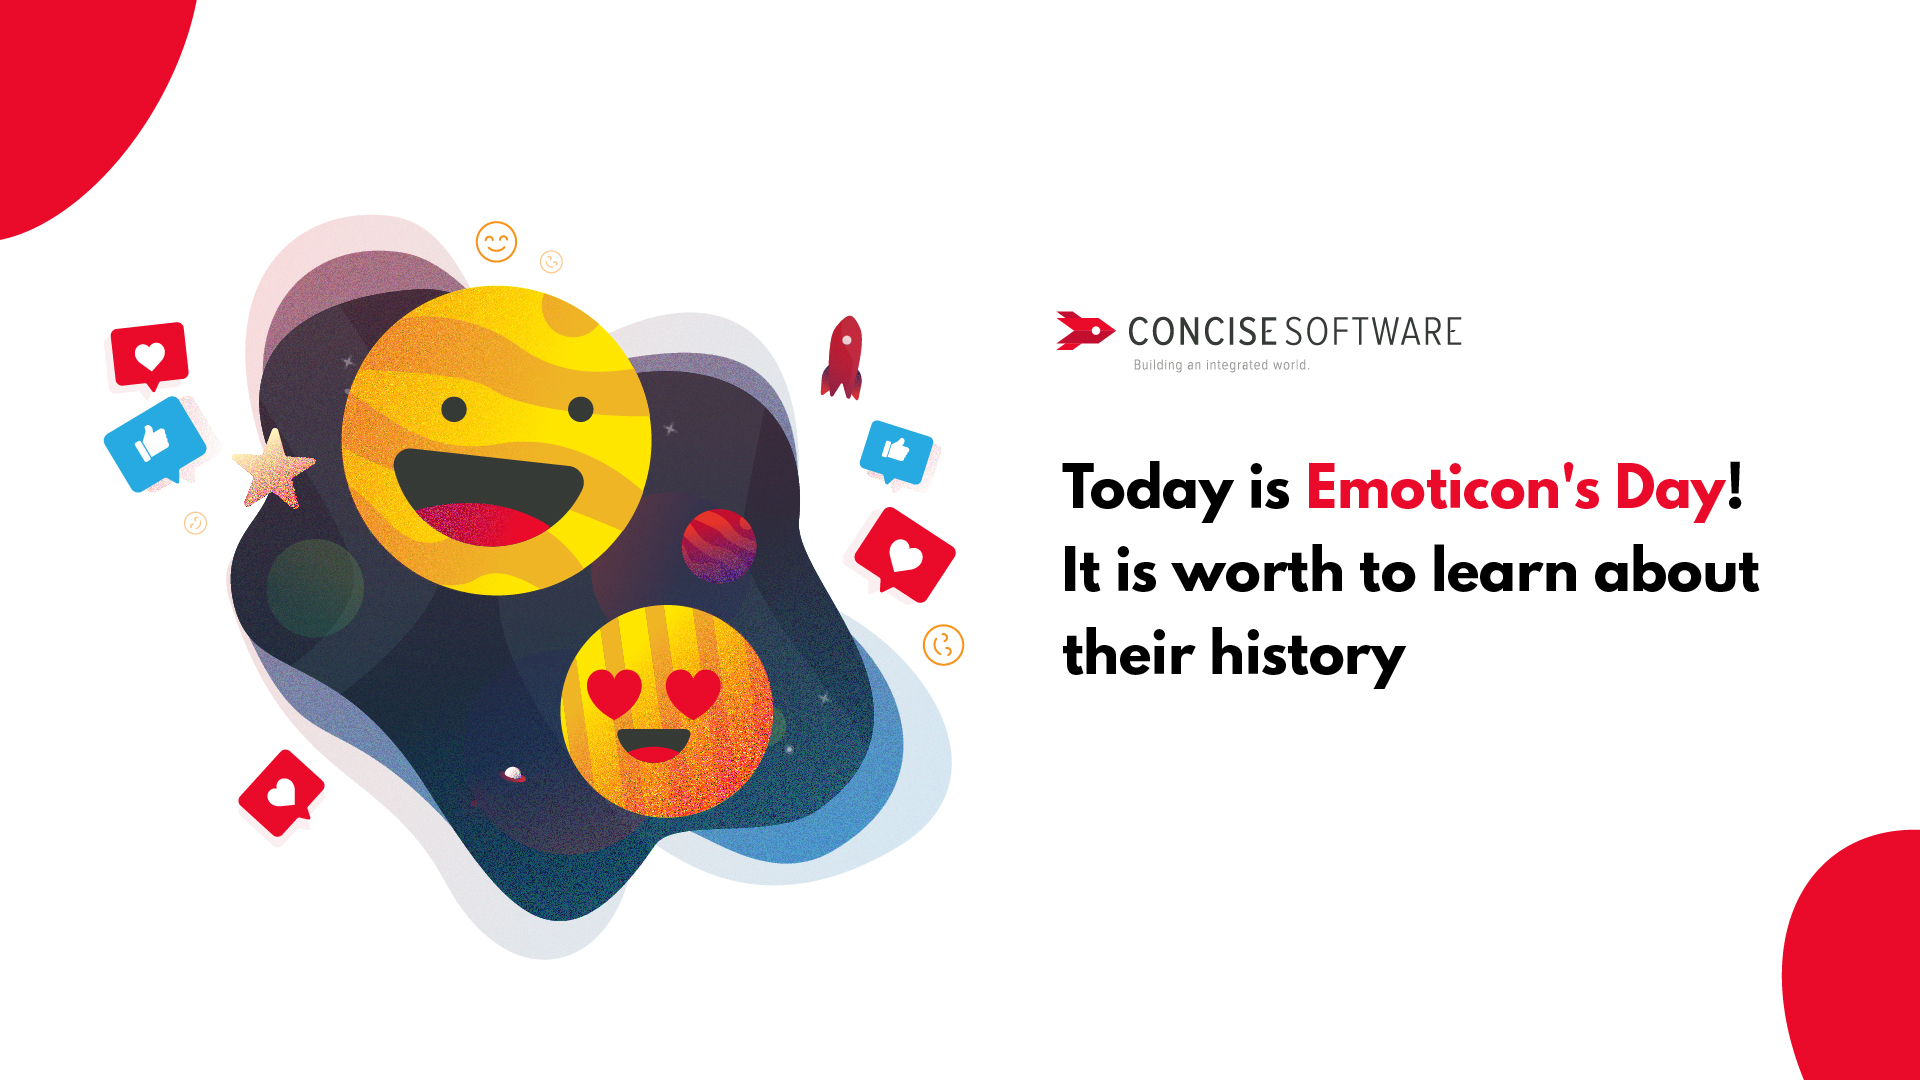 Emoticon's Day and its history | Concise Software